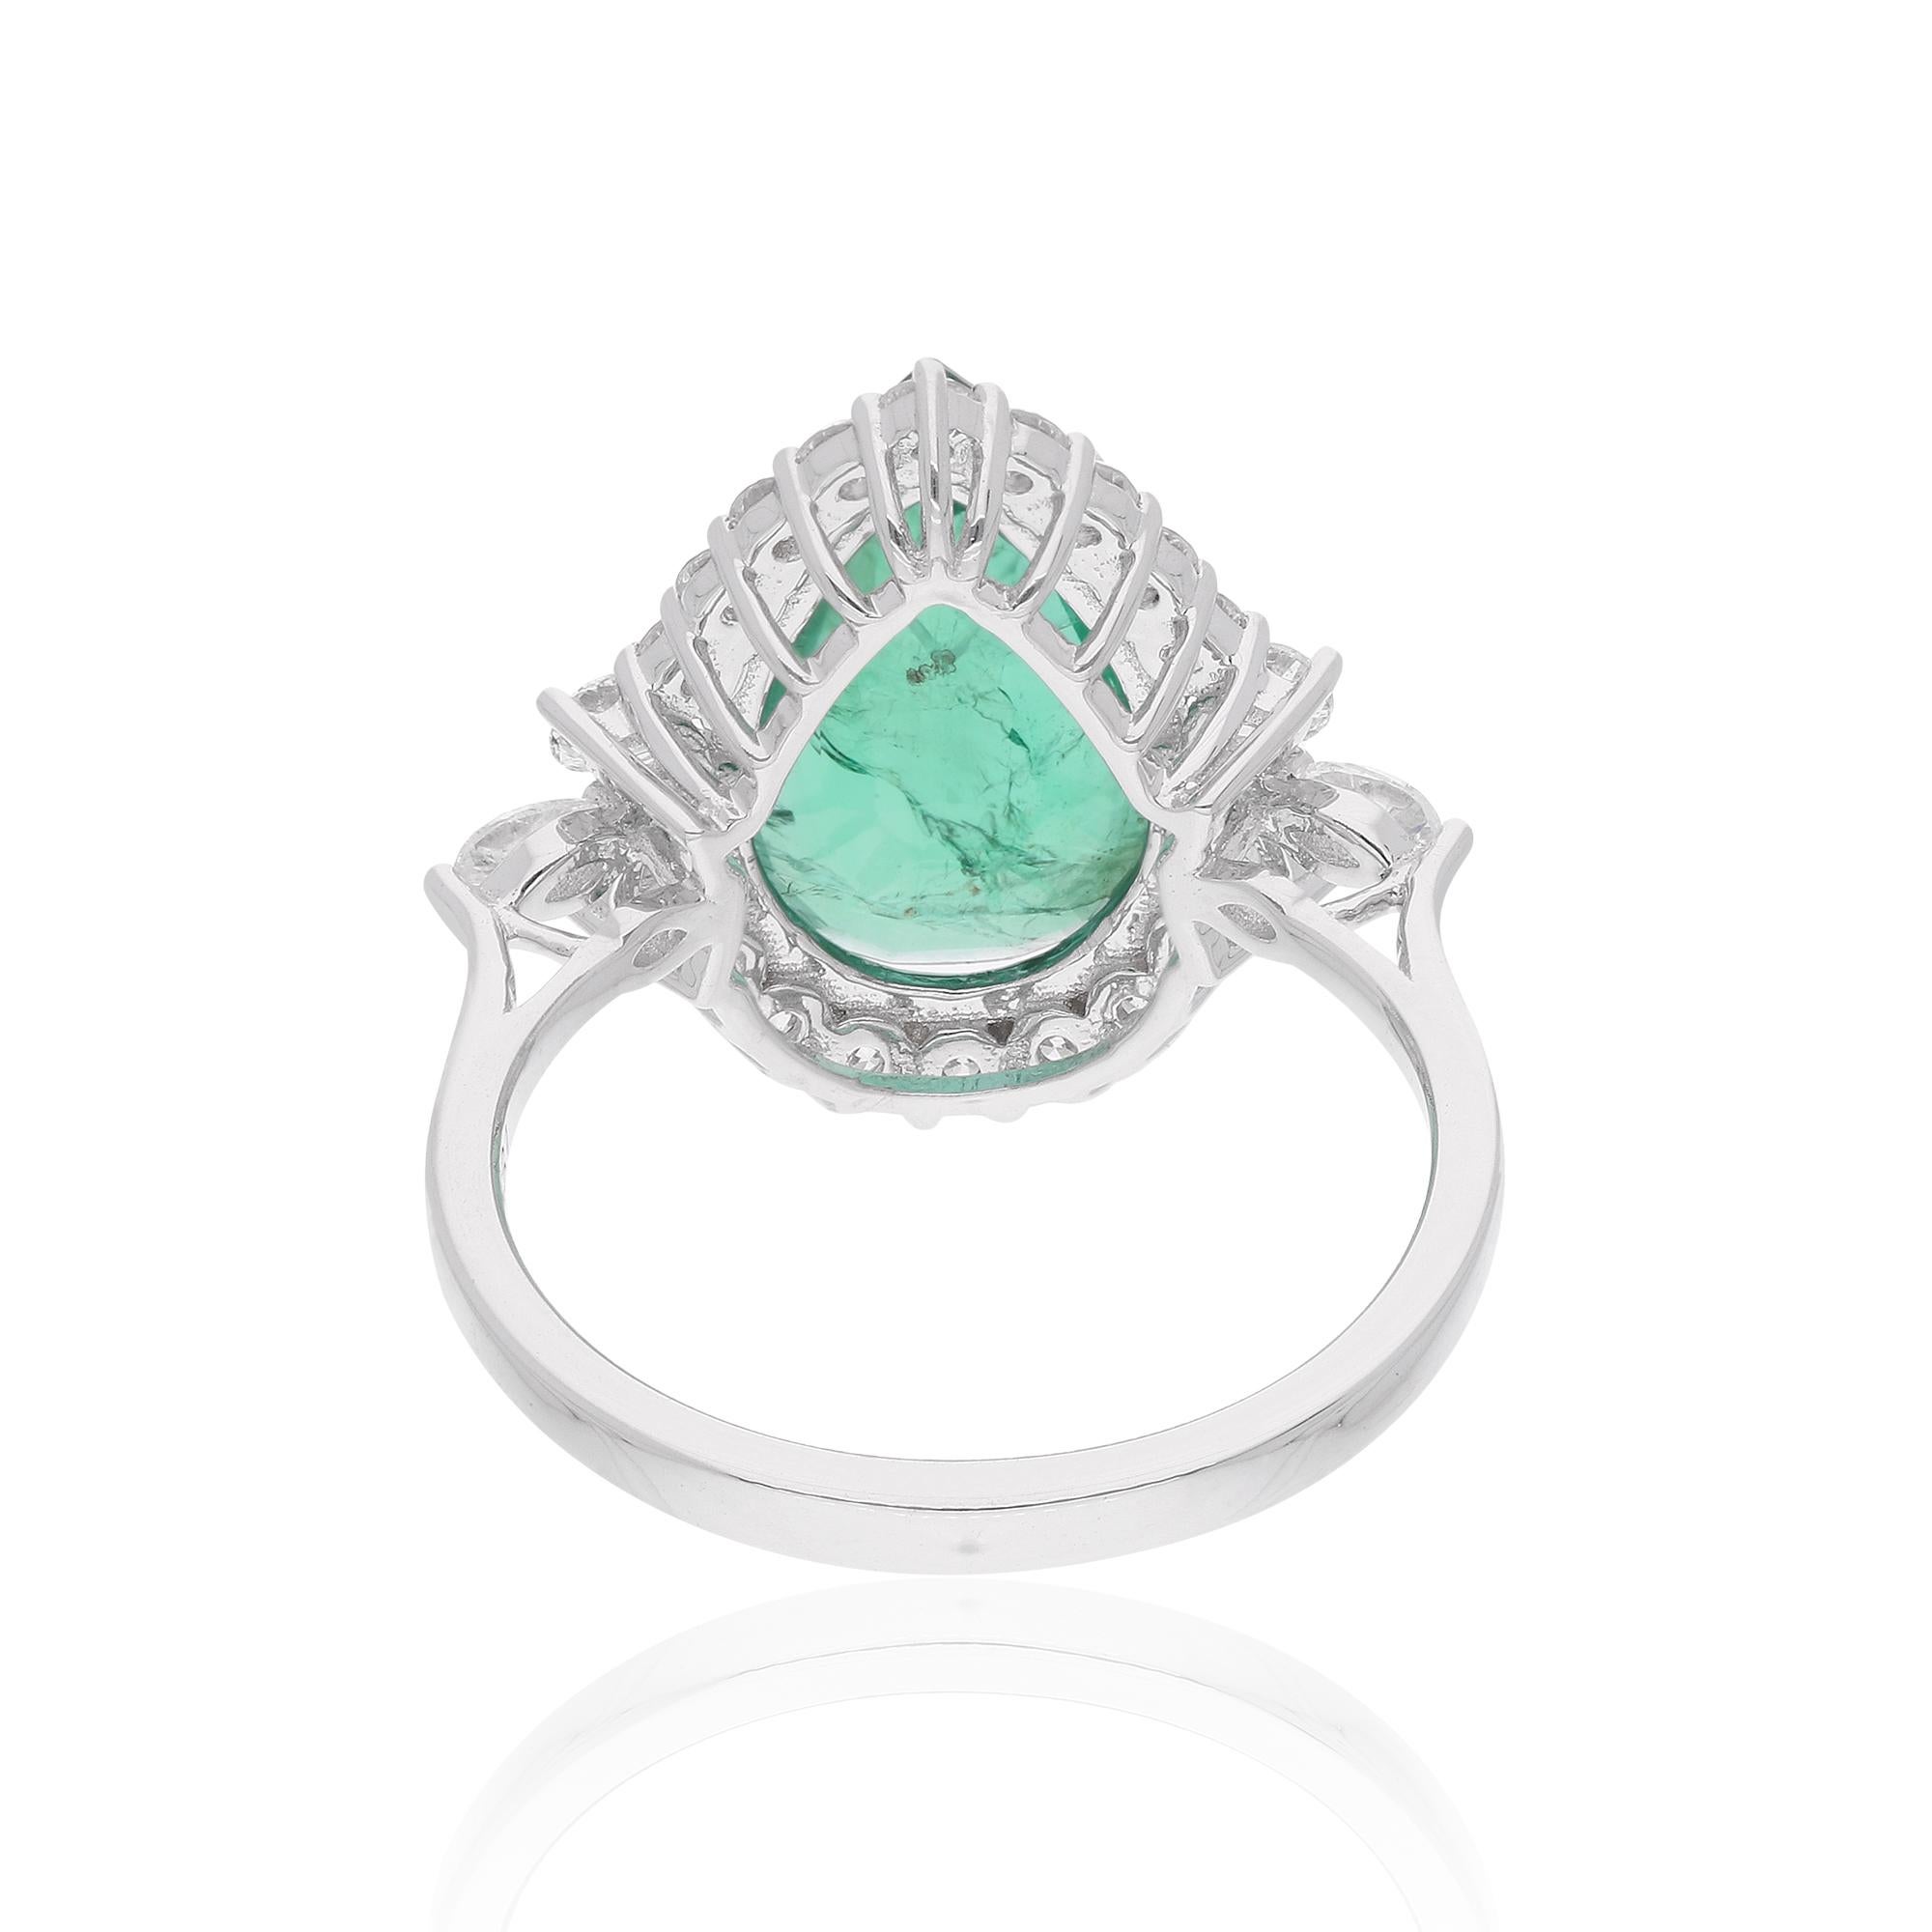 Item Code :- SER-24013
Gross Wt. :- 4.64 gm
18k Solid White Gold Wt. :- 3.85 gm
Natural Diamond Wt. :- 0.84 Ct.  (AVERAGE DIAMOND CLARITY SI1-SI2 AND Colour H-I)
Emerald Wt. :- 3.13 Ct.
Ring Size :- 7 US & All size available

✦